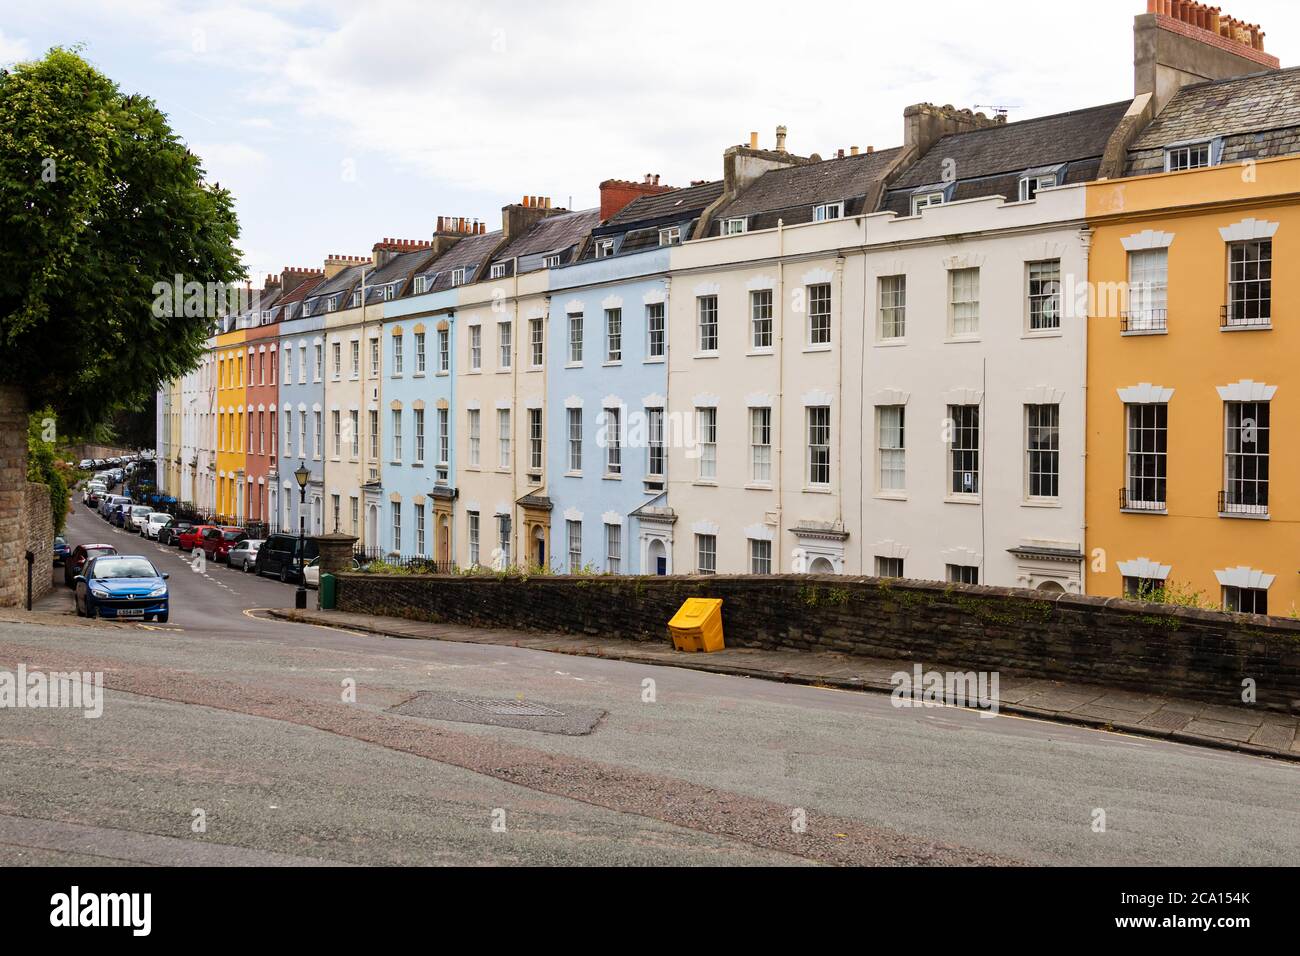 Colourful houses on Cornwallis Crescent, Clifton, Bristol, England. July 2020 Stock Photo